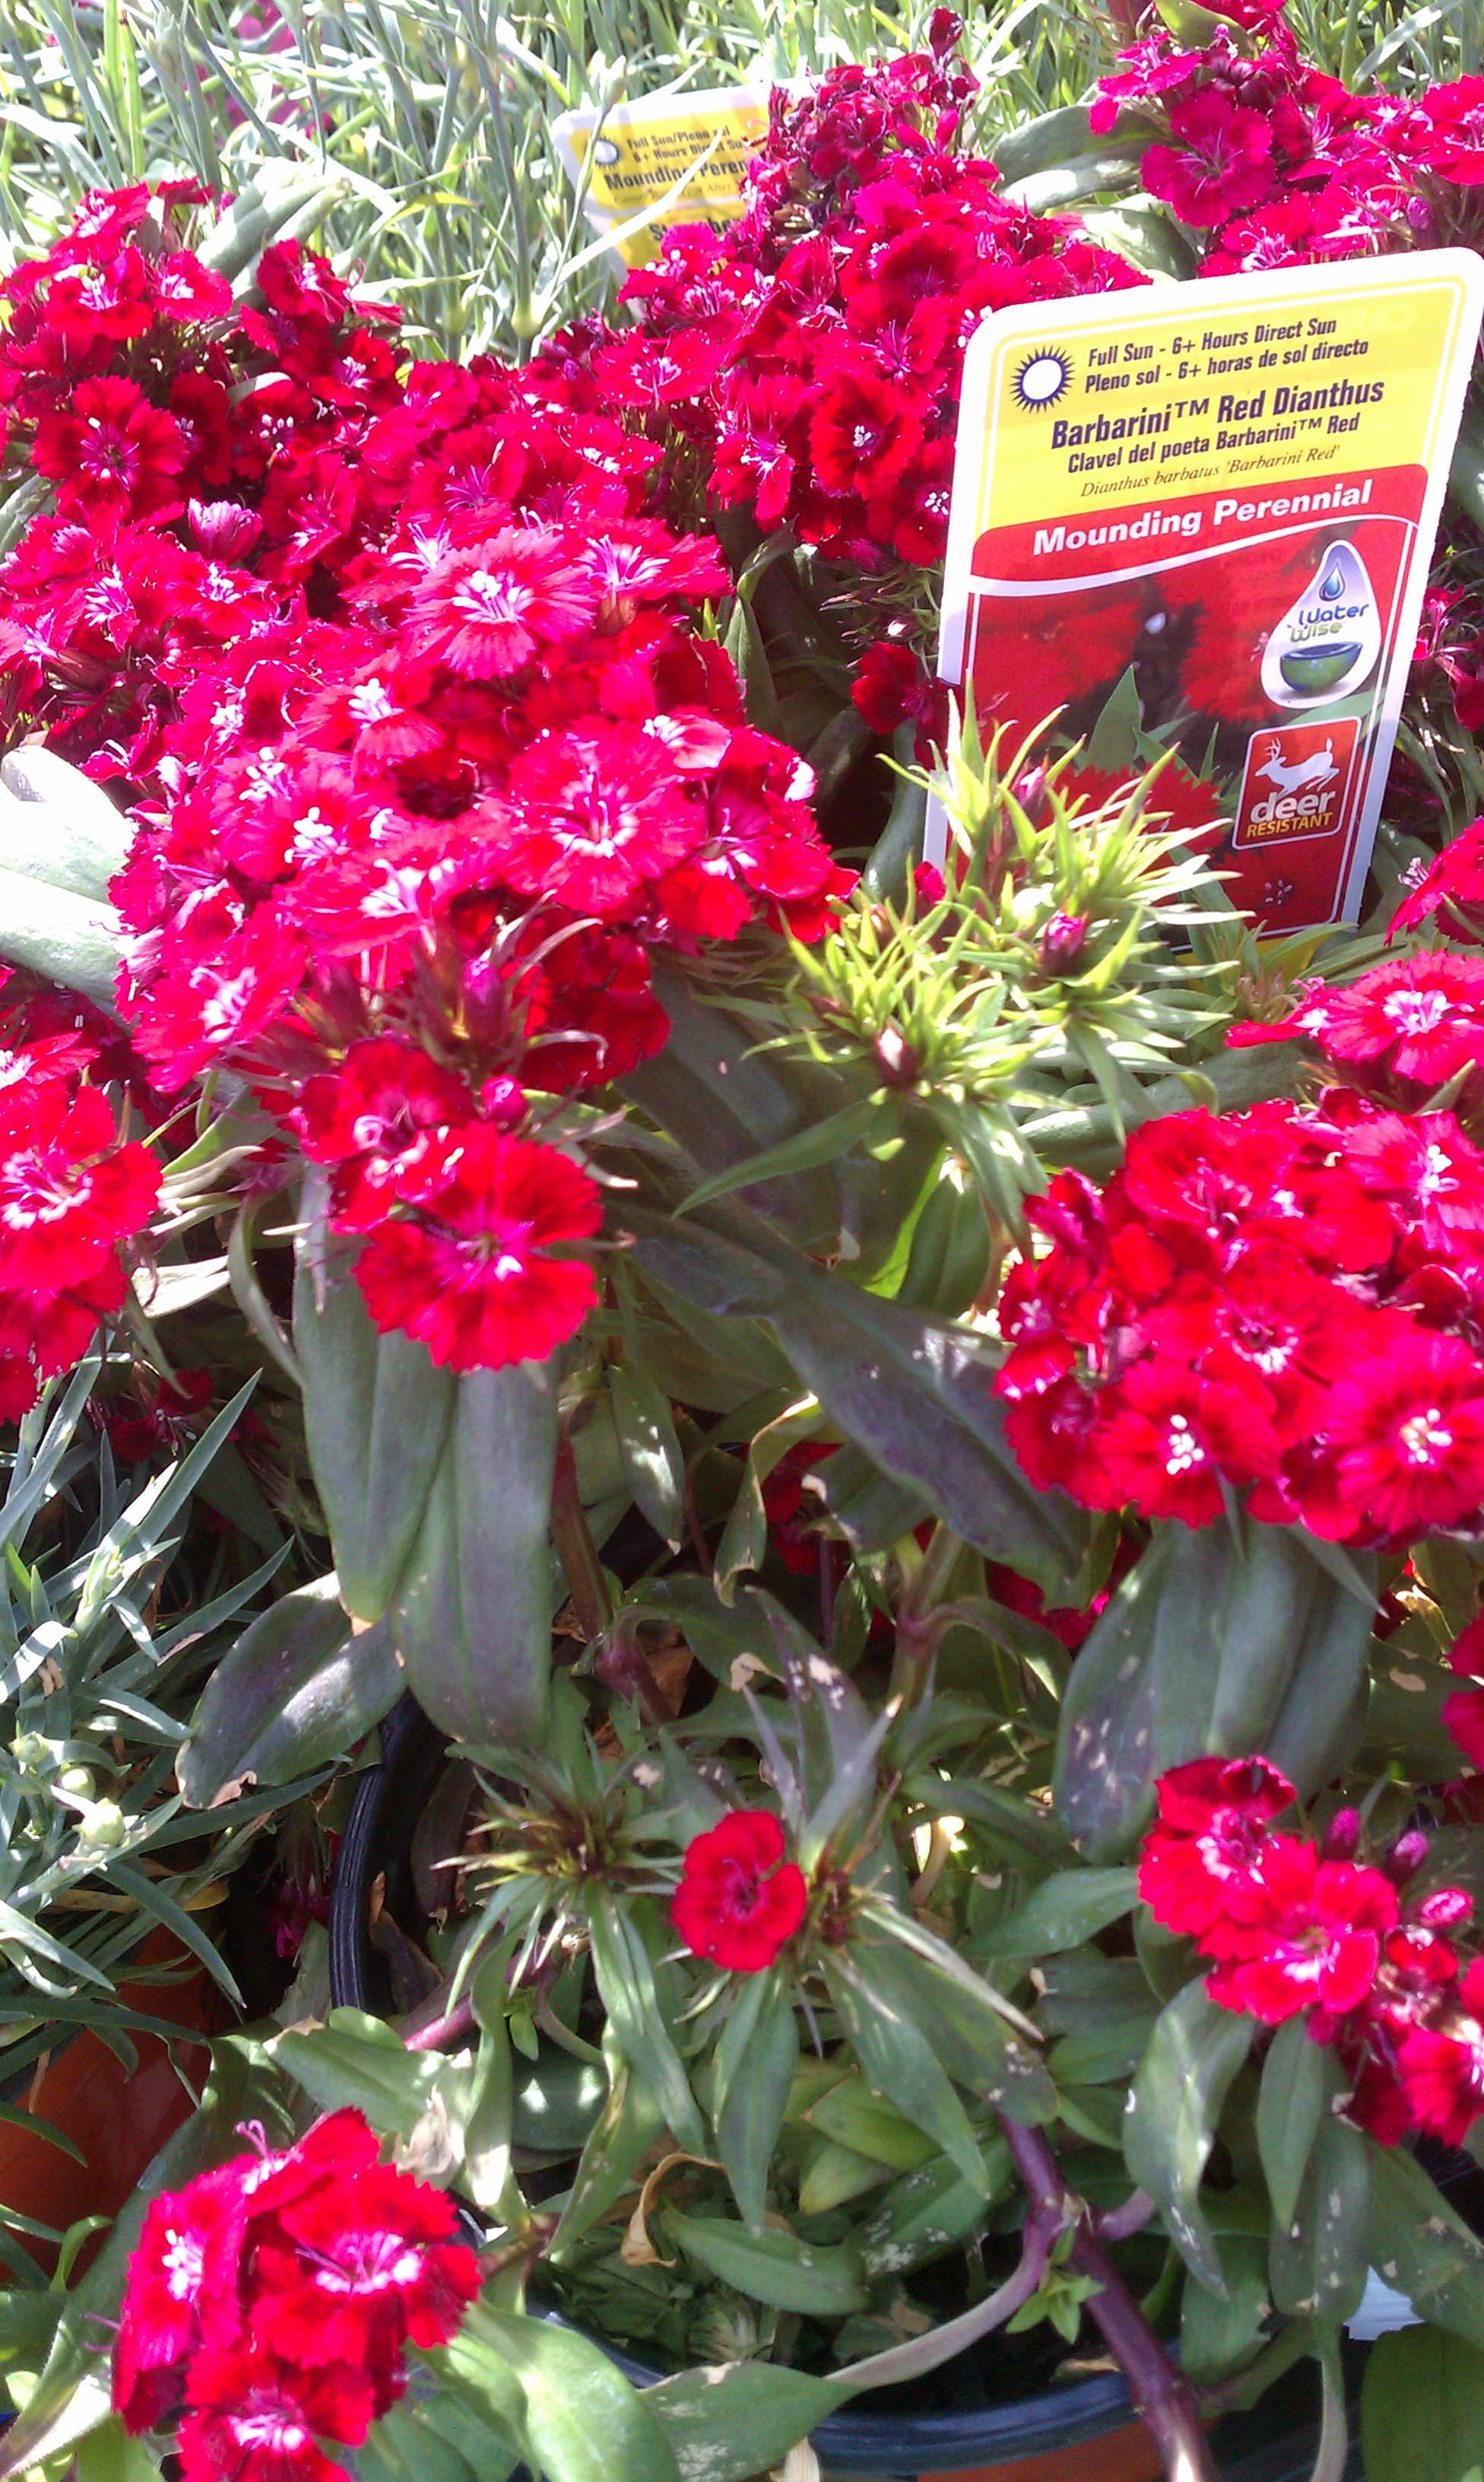 Dianthus are Carnation Flowers